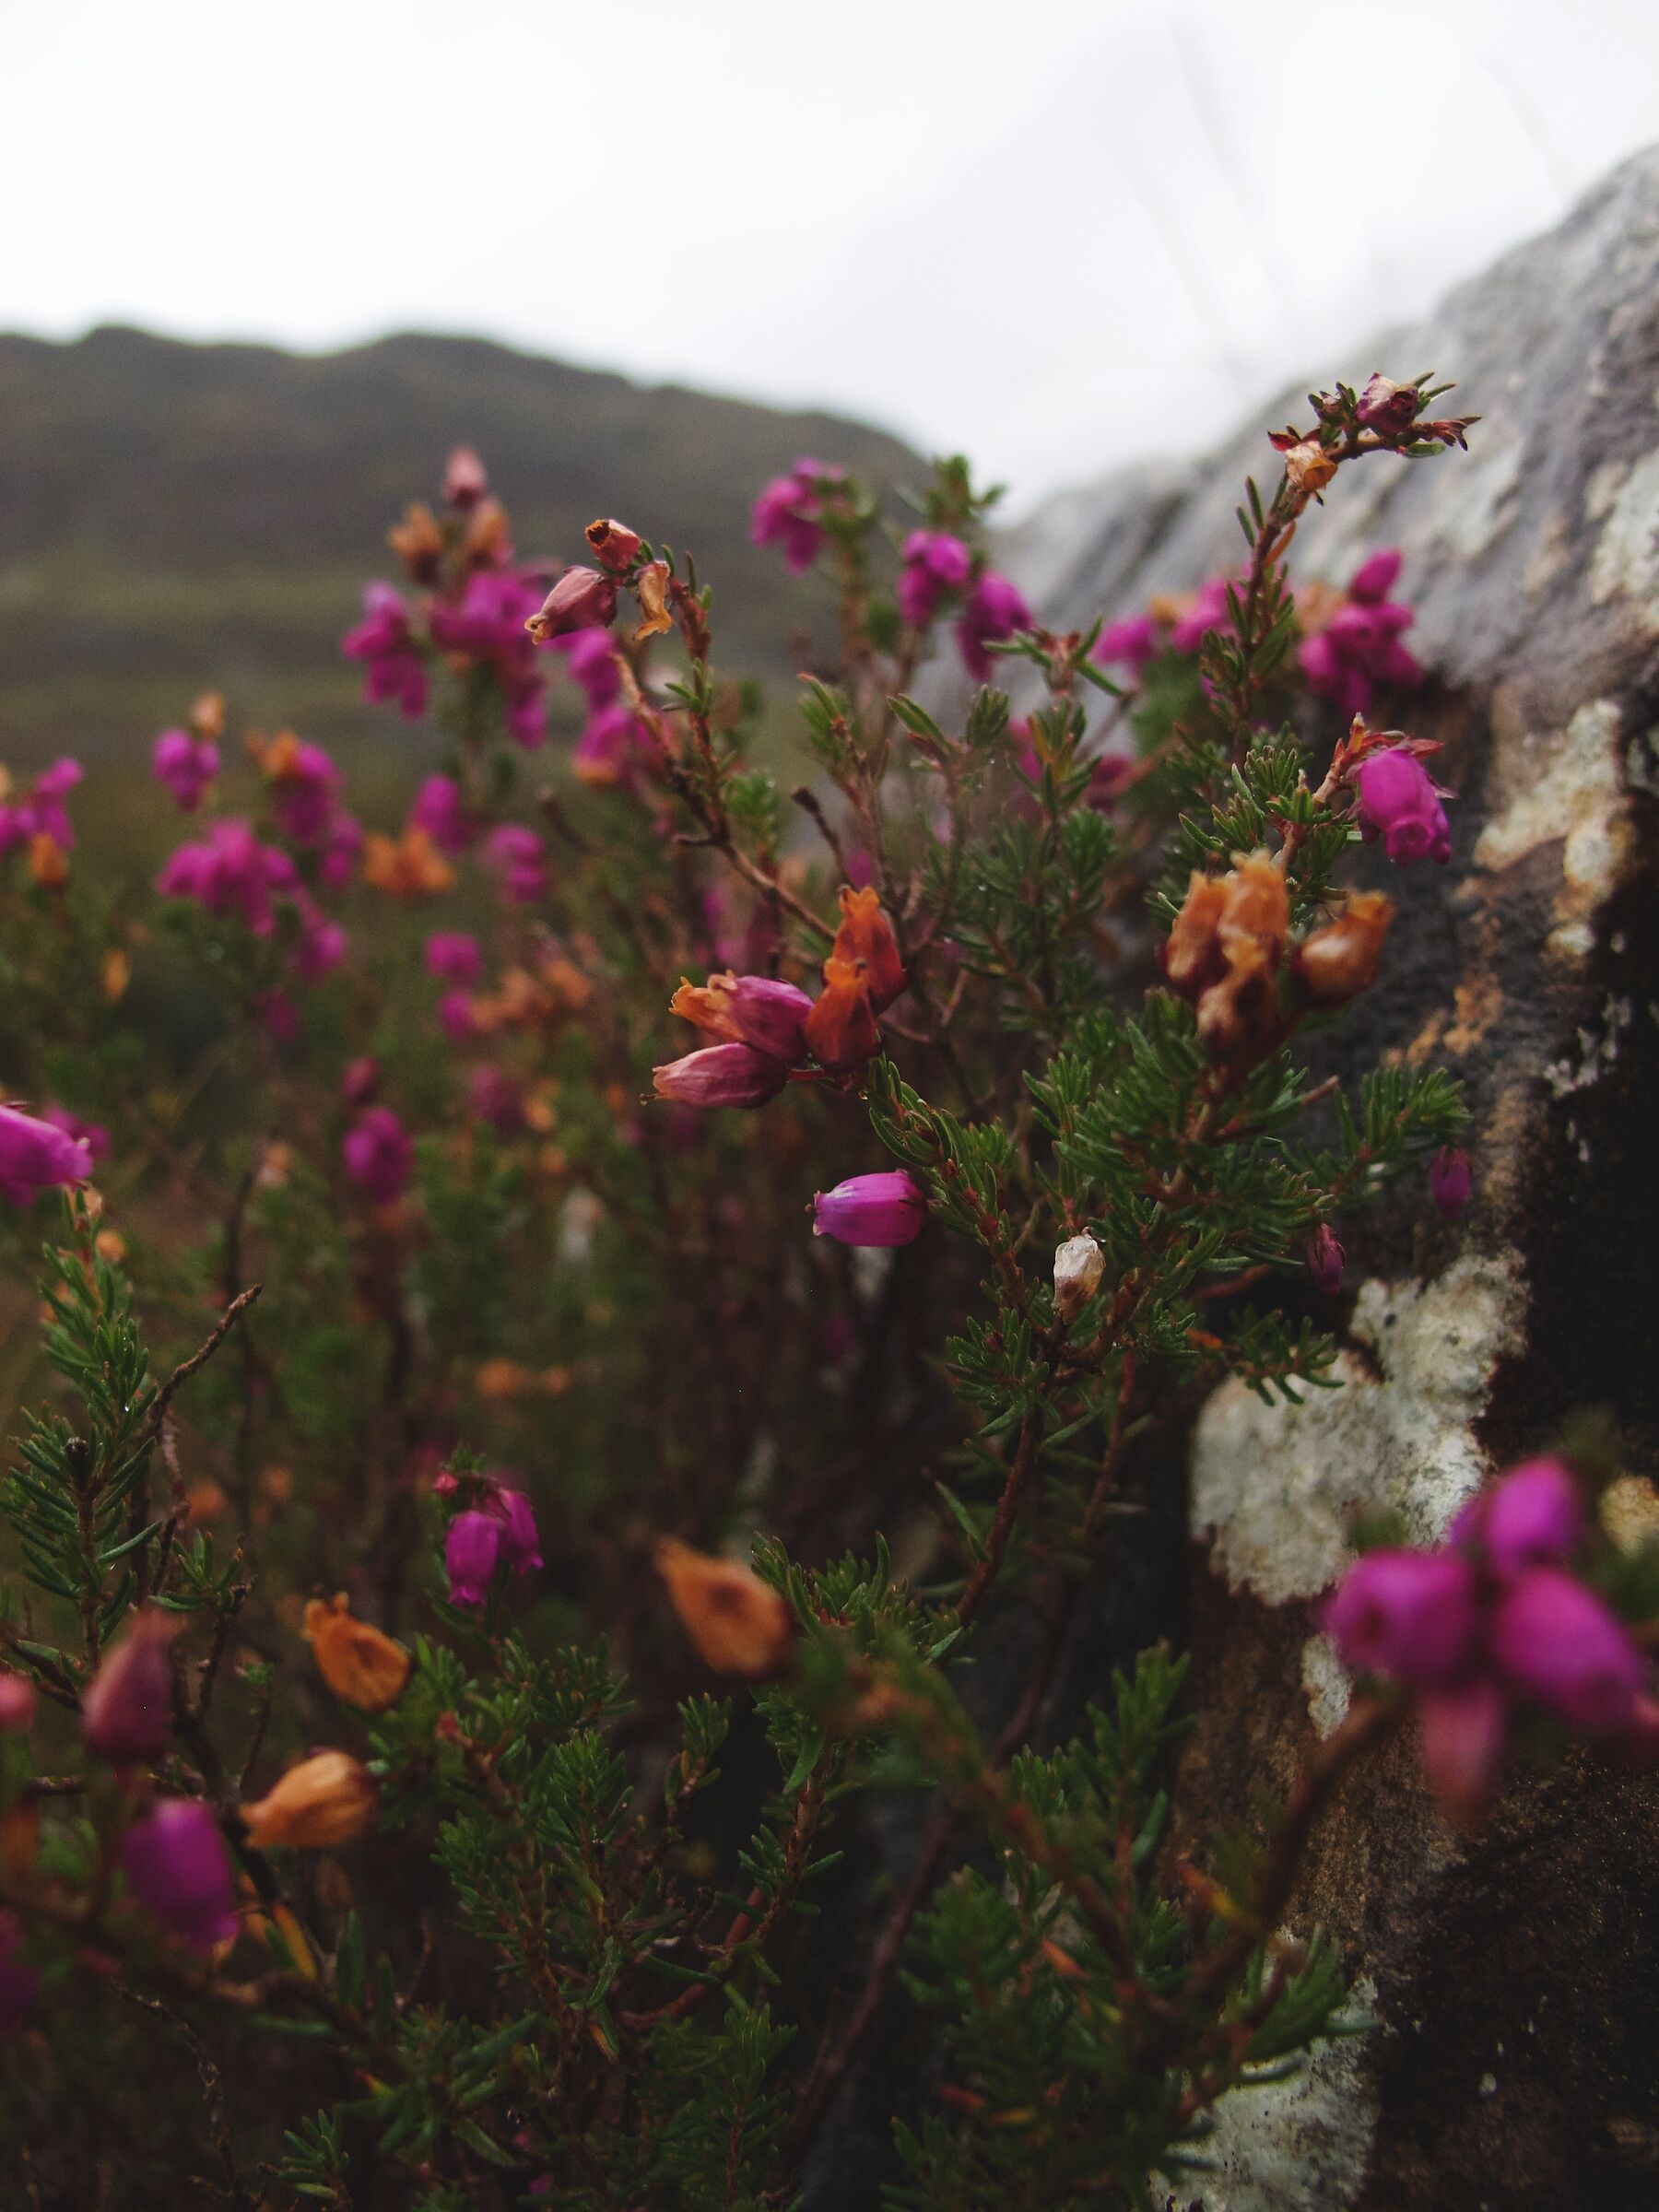 The Wee Enchanting Heather...